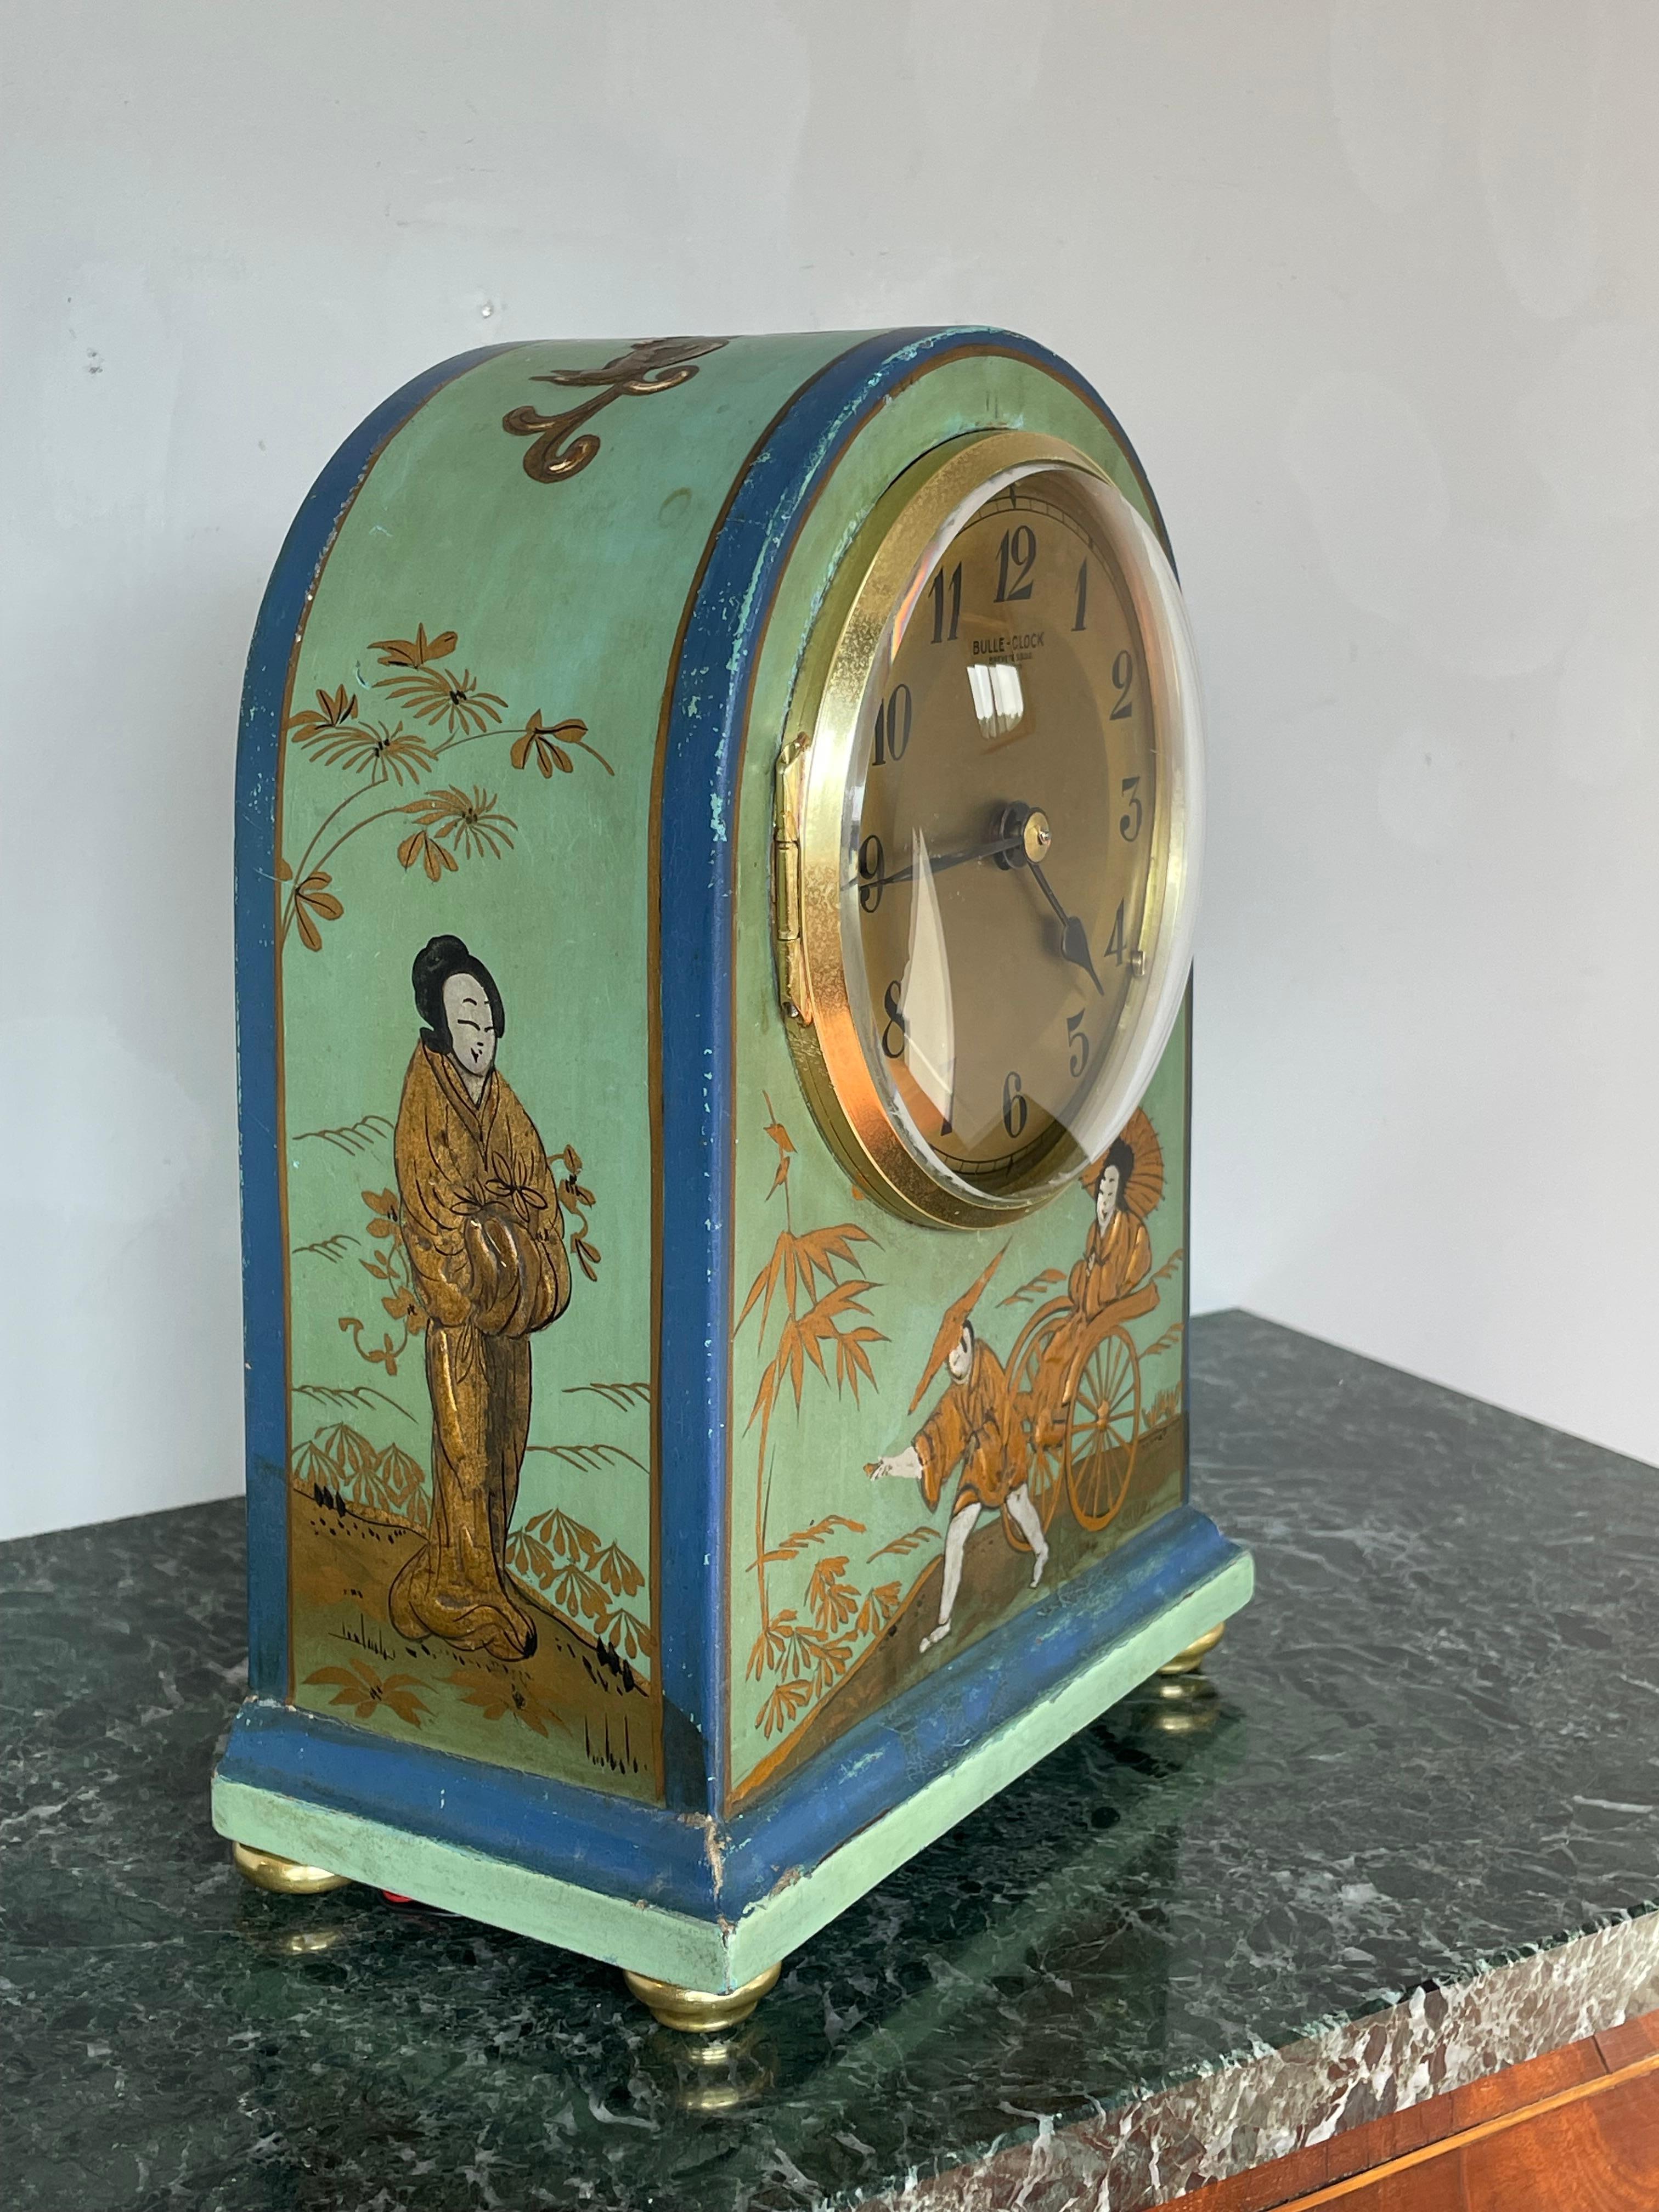 Handcrafted and rare, Asian style, hand-painted & gilt table, desk or mantel clock.

This rare combination-of-styles clock is in good condition, in perfect working order and a joy to own and to look at. We had never before seen a 1930s table clock